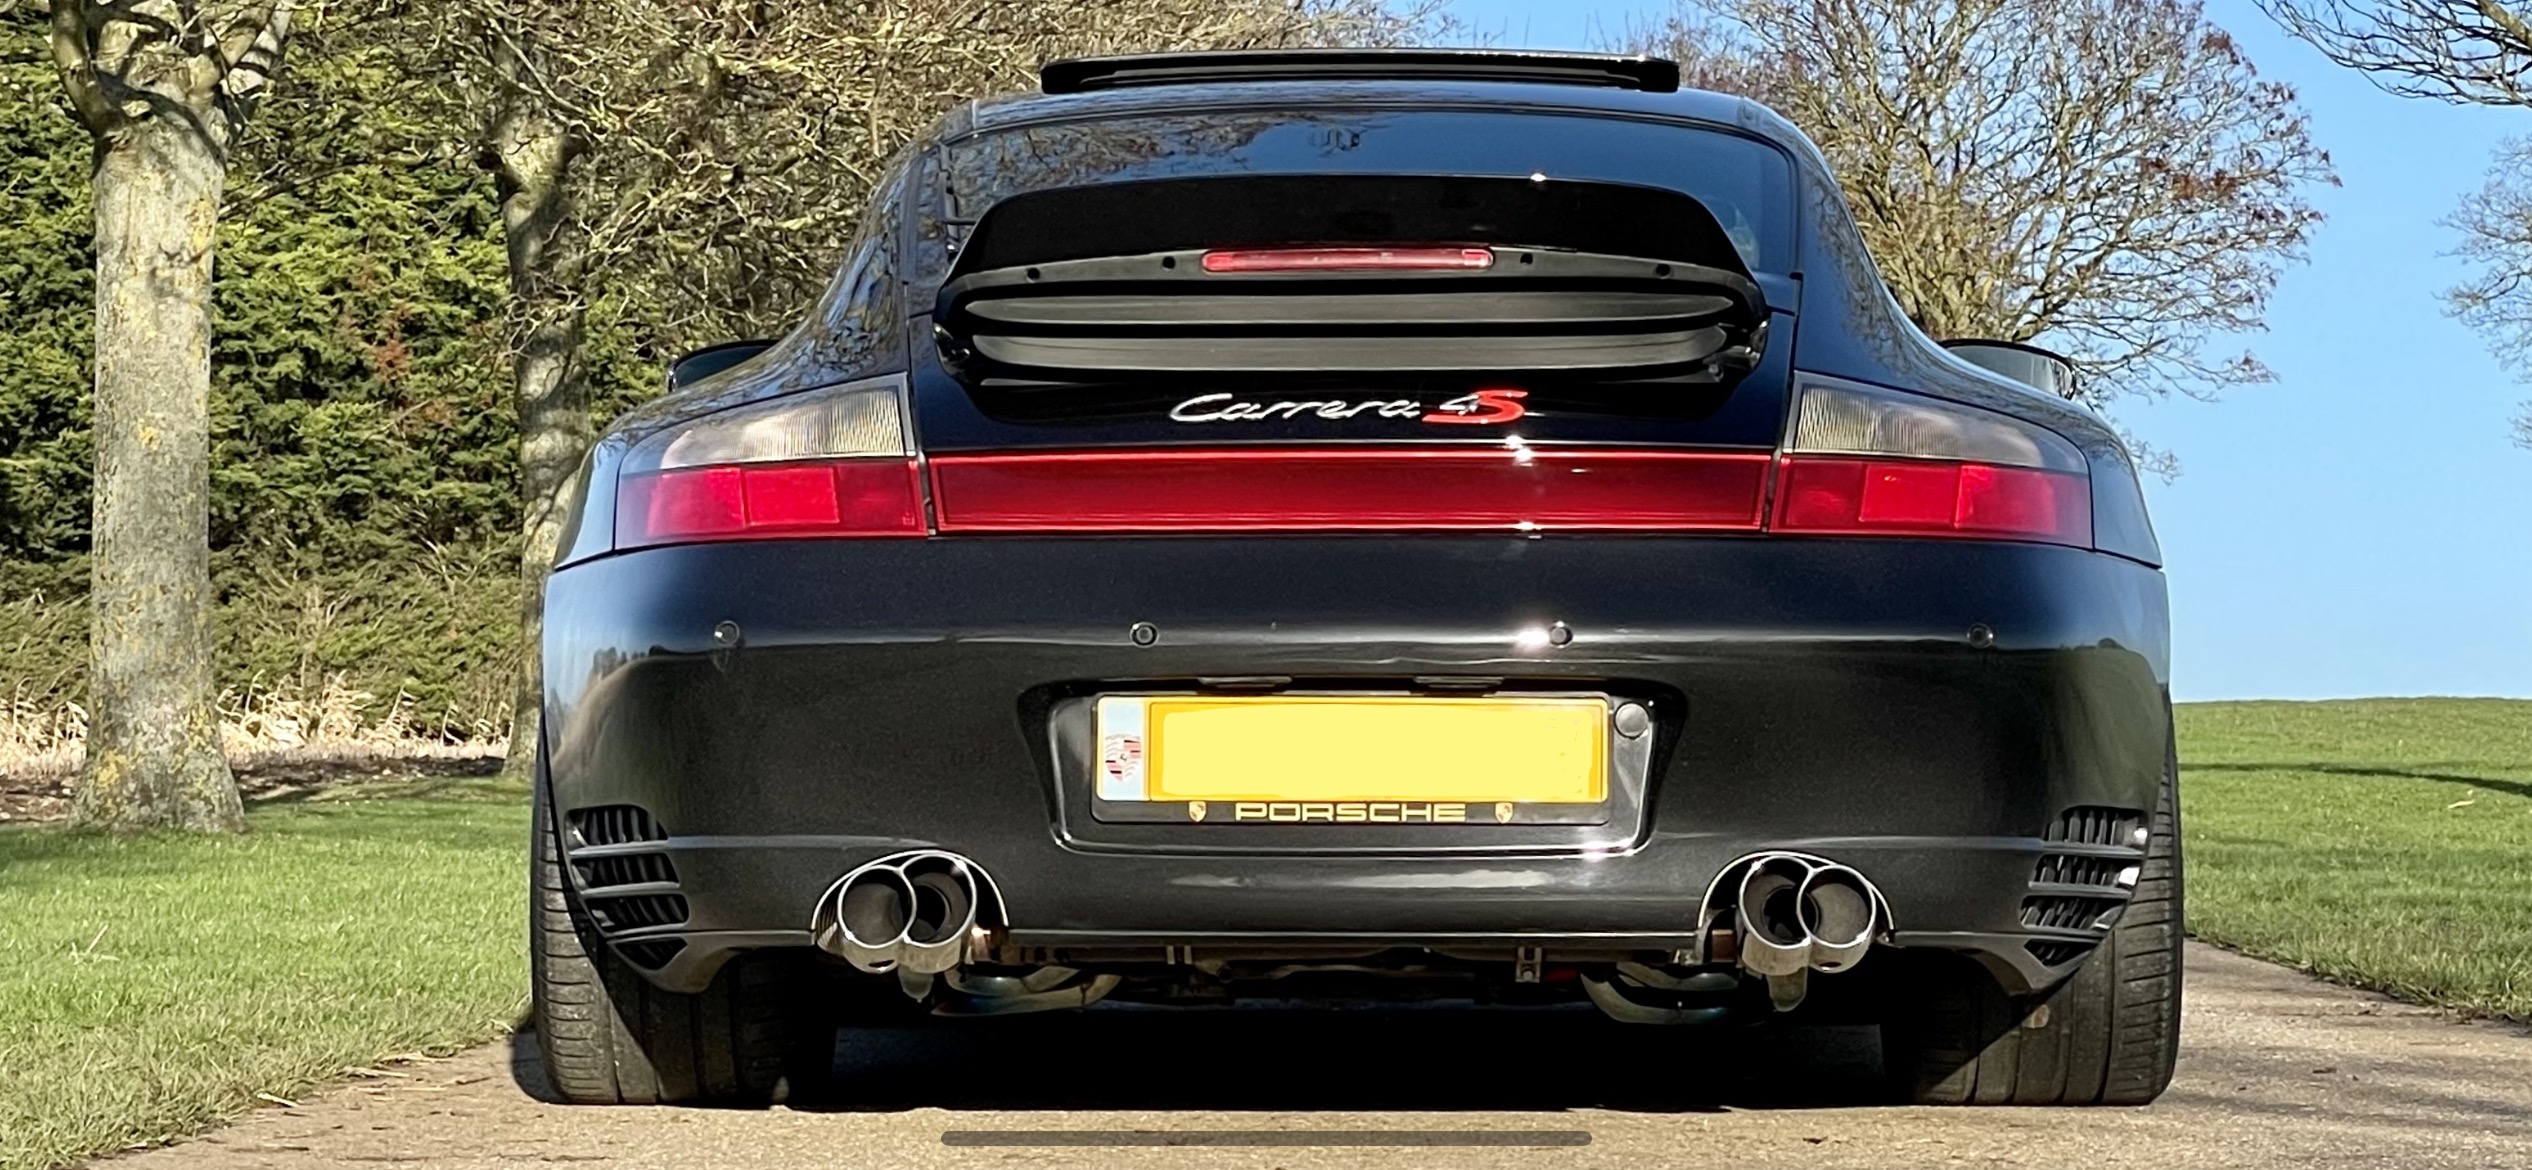 Porsche DNS 996 911 Ducktail Duck Tail spoiler raised modified duck tail C4S rear wide body